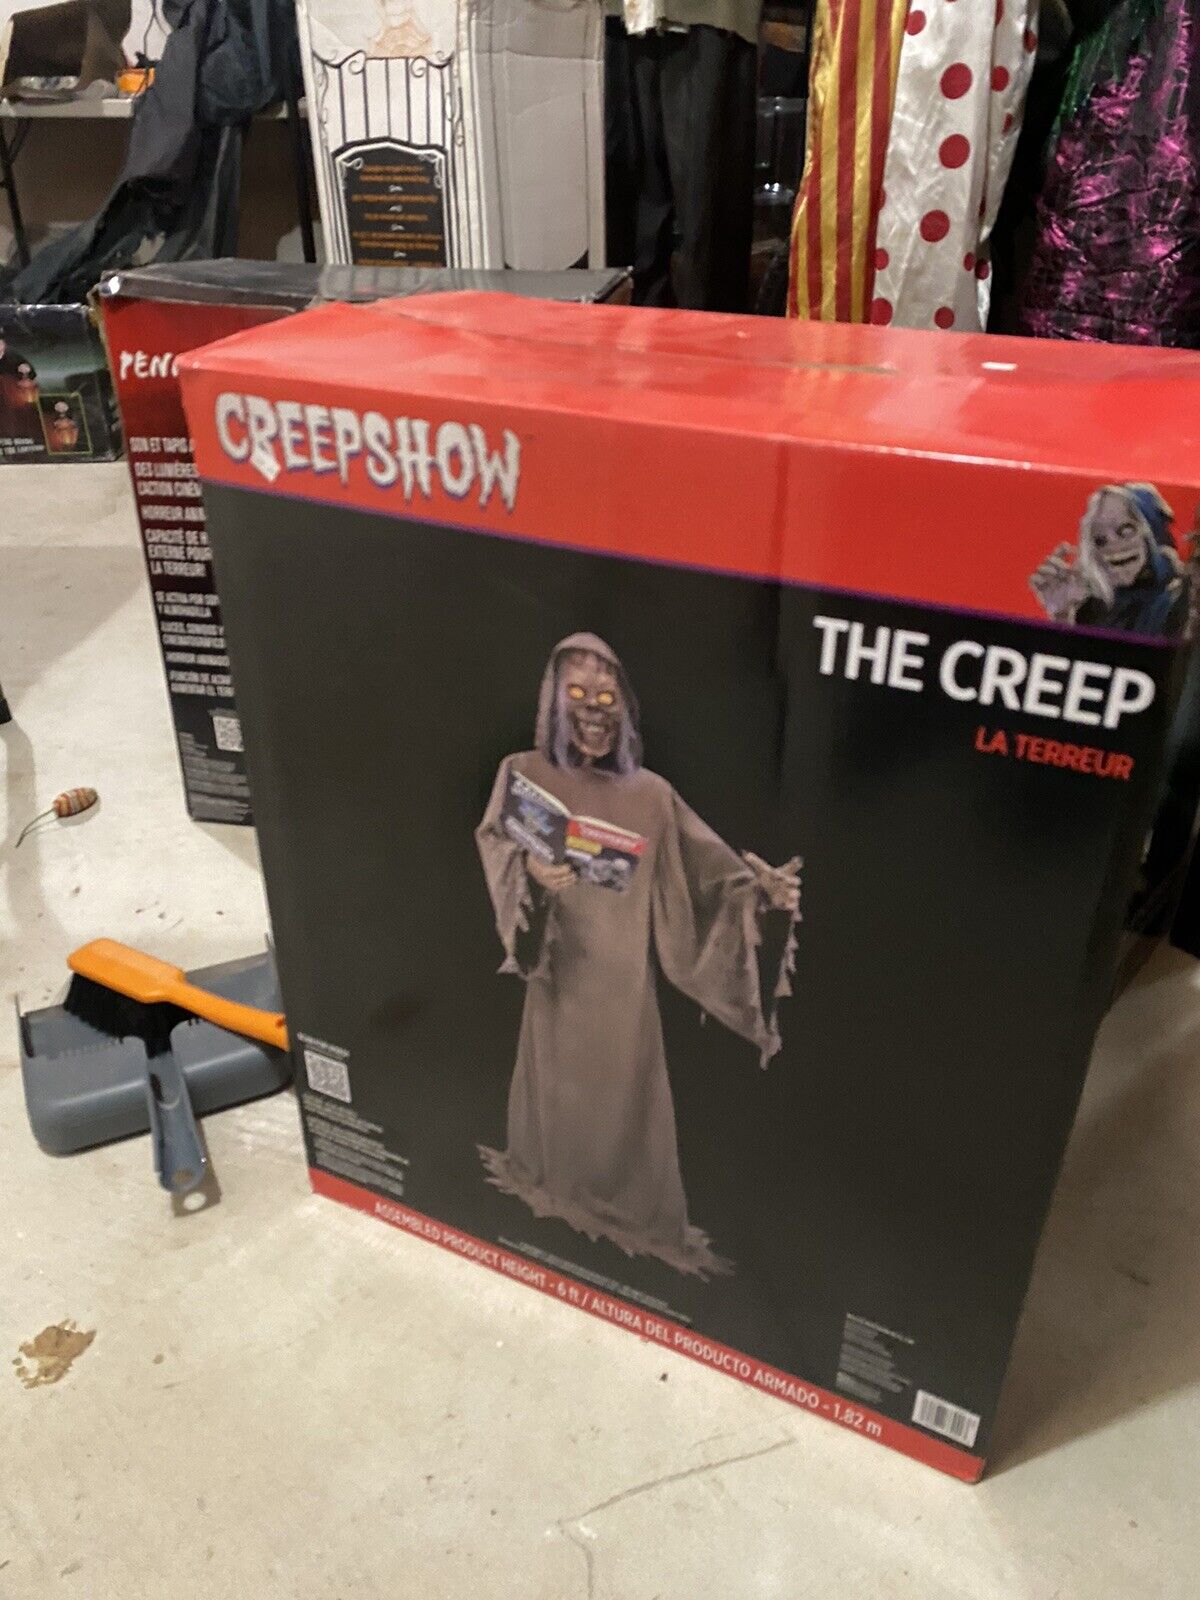 CREEPSHOW The Creep Set Up Once Party City. 6FT Motion Activated